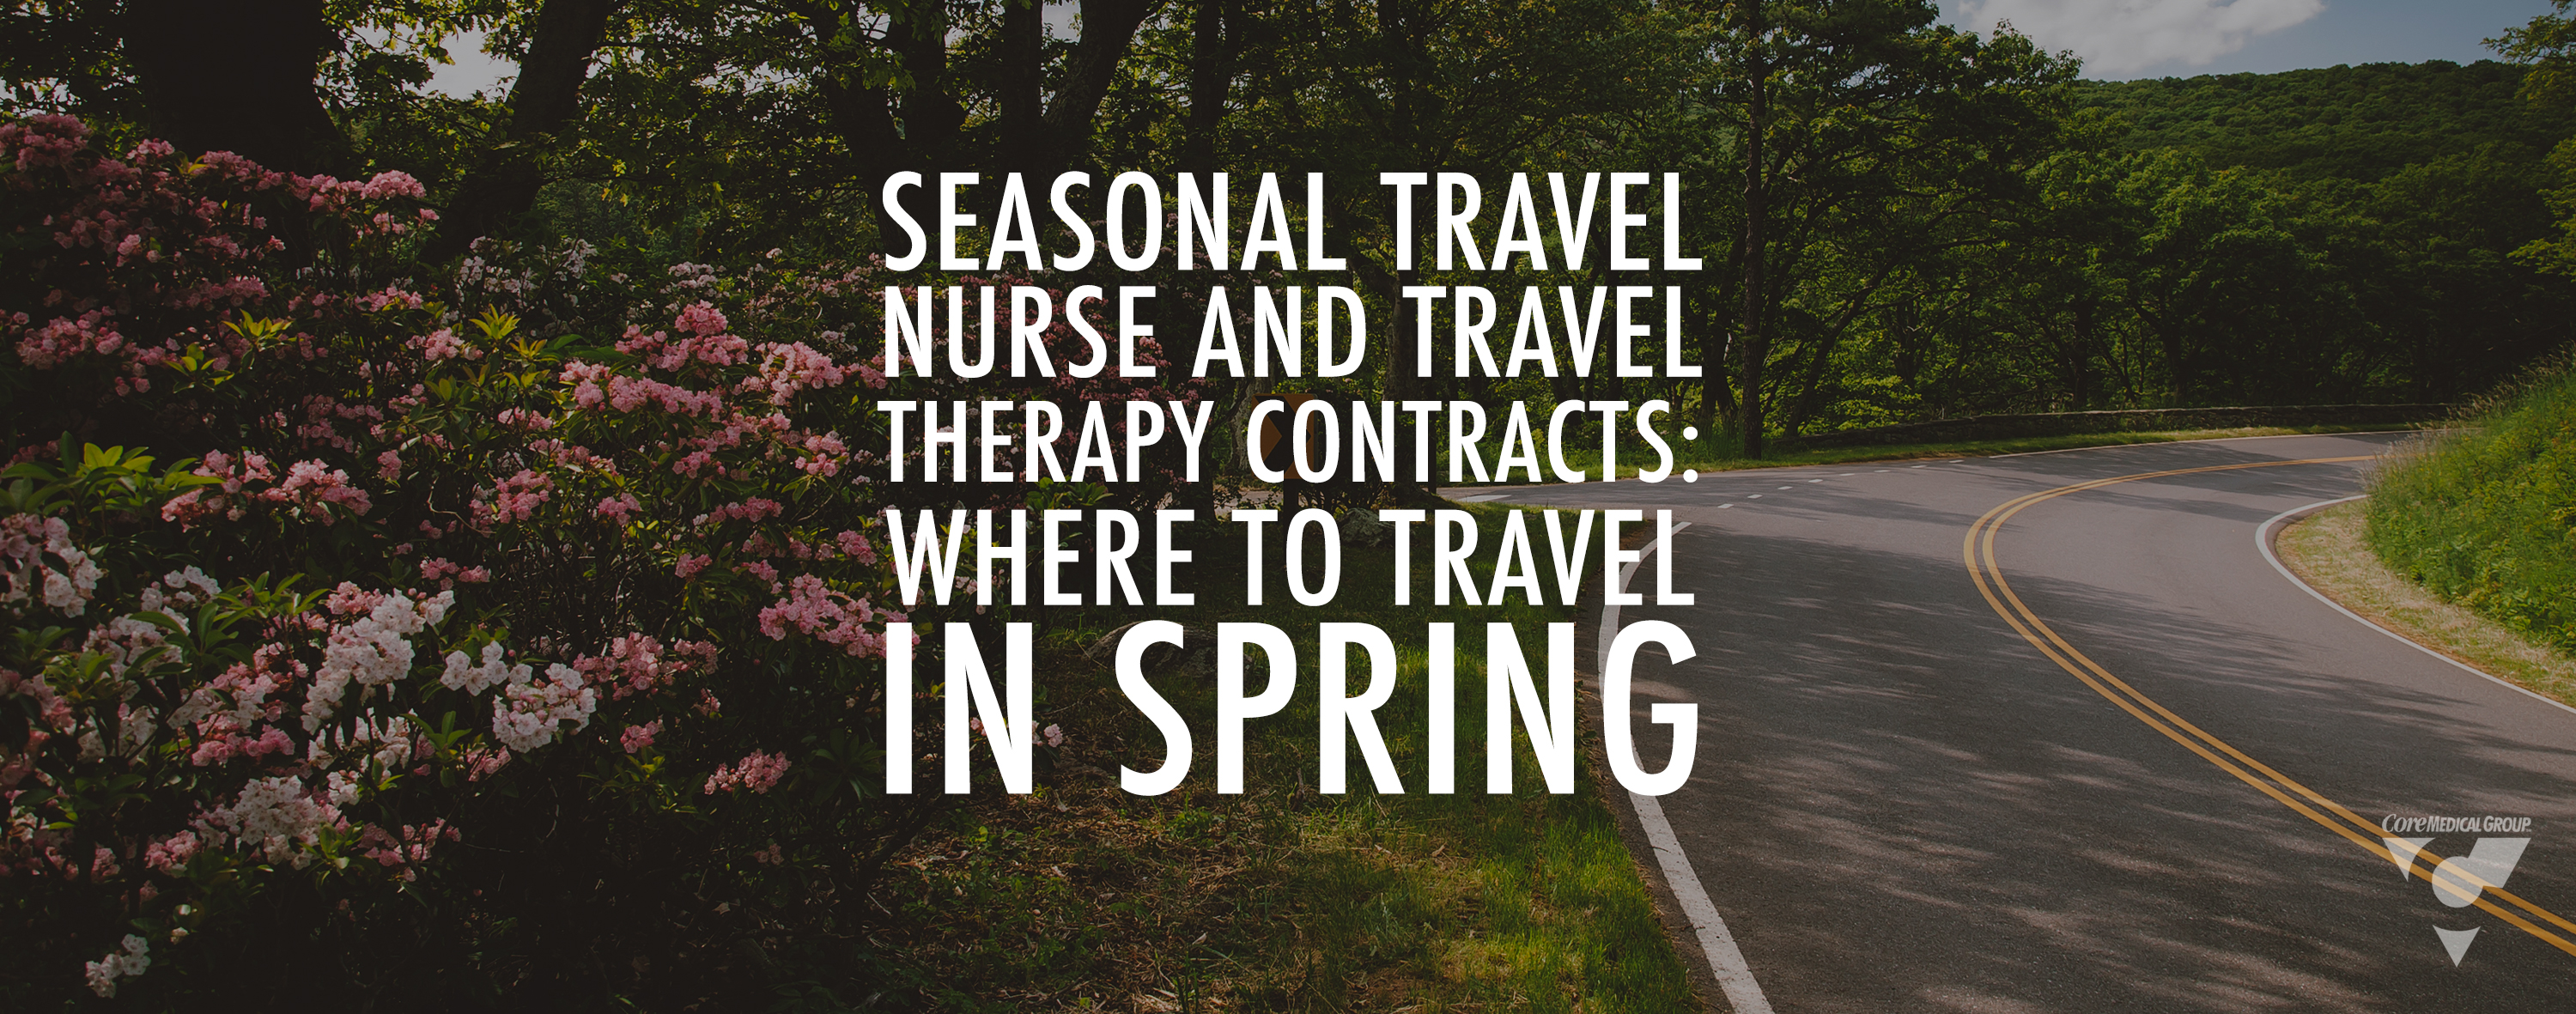 Seasonal Travel Nurse and Travel Therapy Contracts Where To Travel In Spring